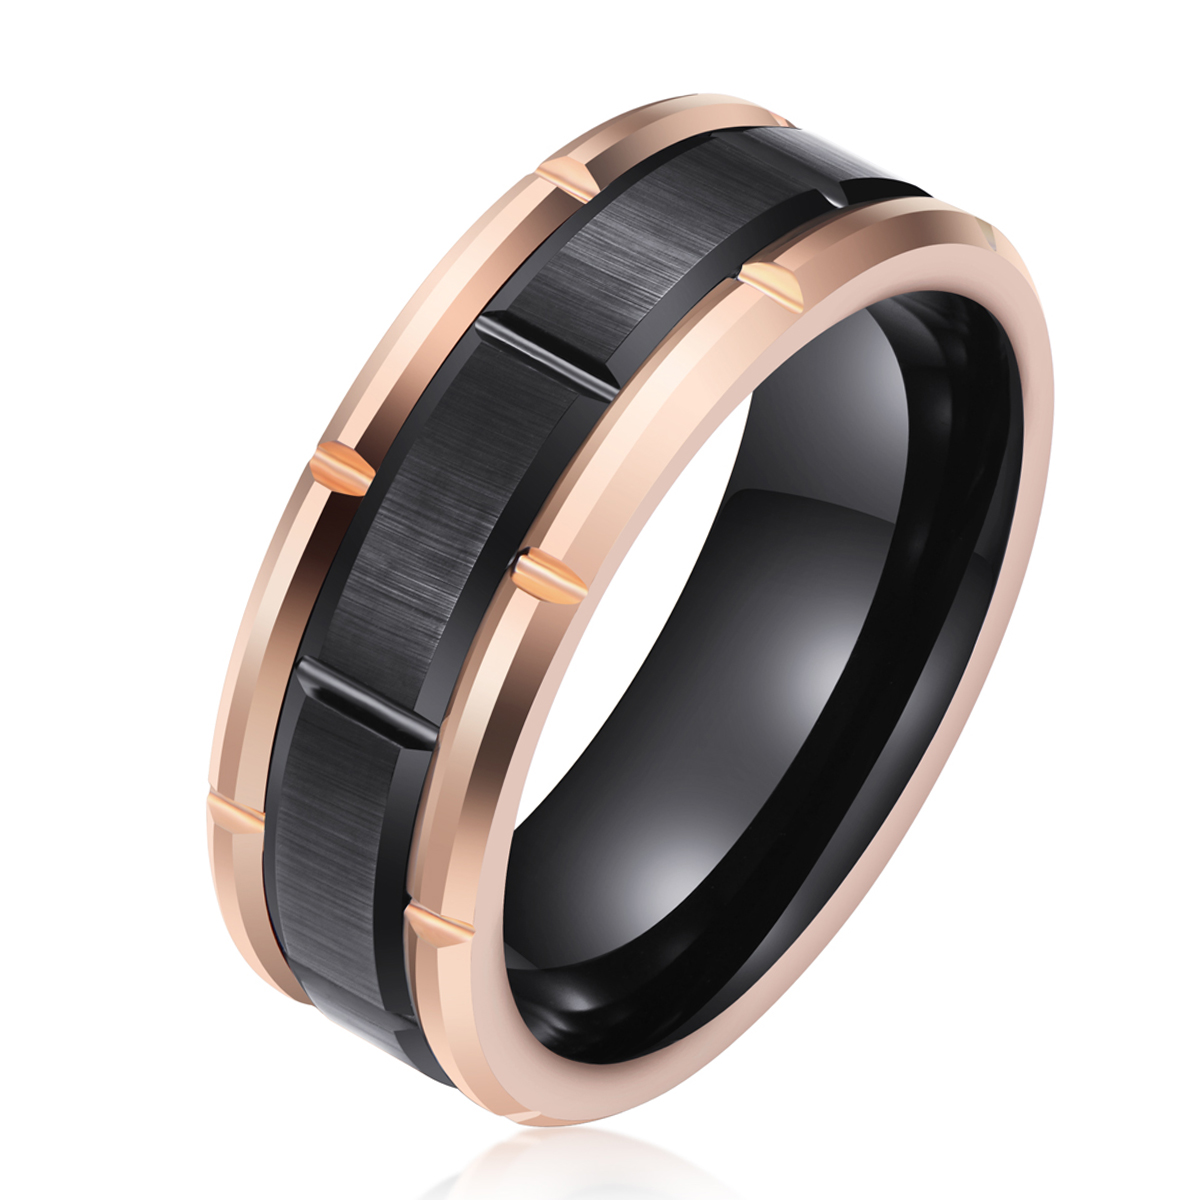 Wholesale Jewelry Combined best tungsten ring men Rings for Men Black 8mm Featured Image